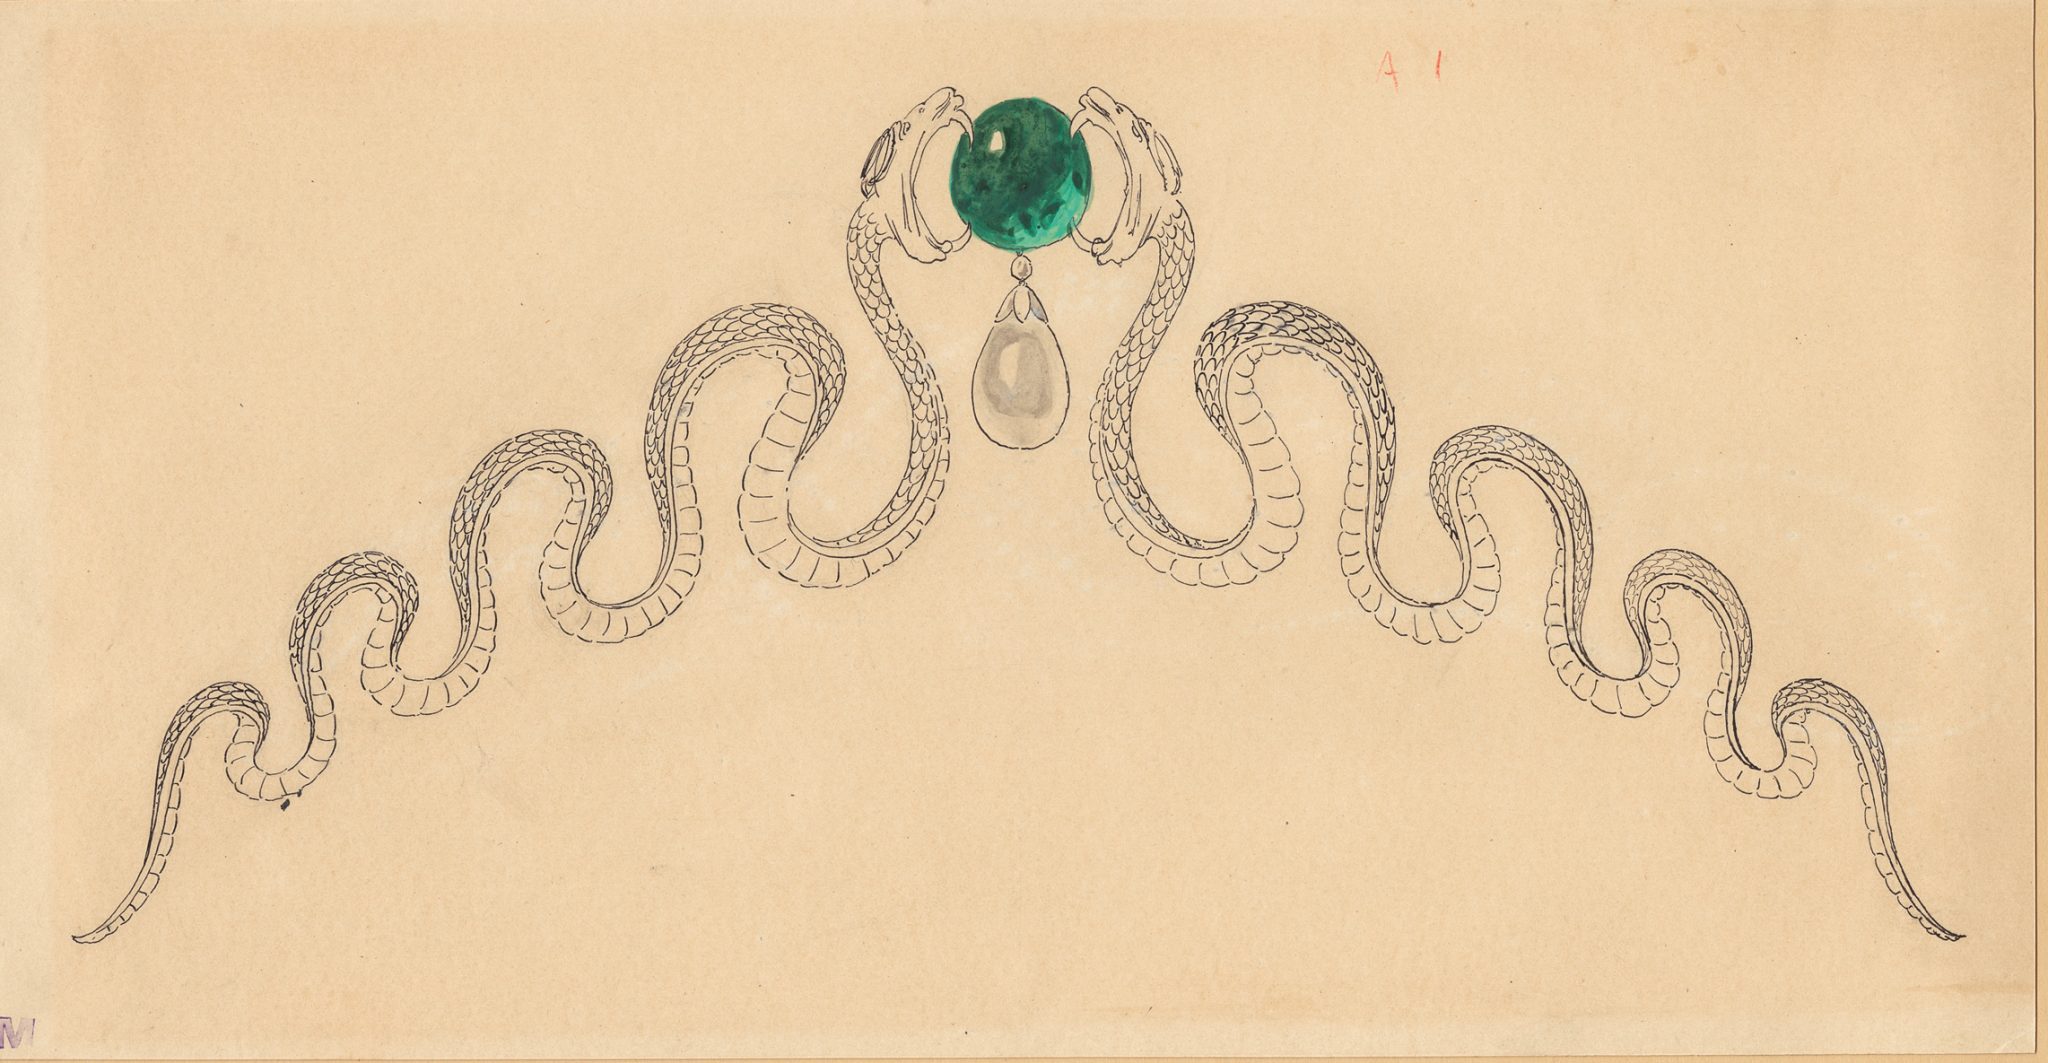 Joseph Chaumet (1852-1926), drawing workshop Preparatory drawing for a tiara with facing snakes surrounding an emerald, Ca. 1890-1900 15.5 x 29 cm Pen and black ink, traces of graphite pencil, gouache wash on cream tinted card © Chaumet Collection